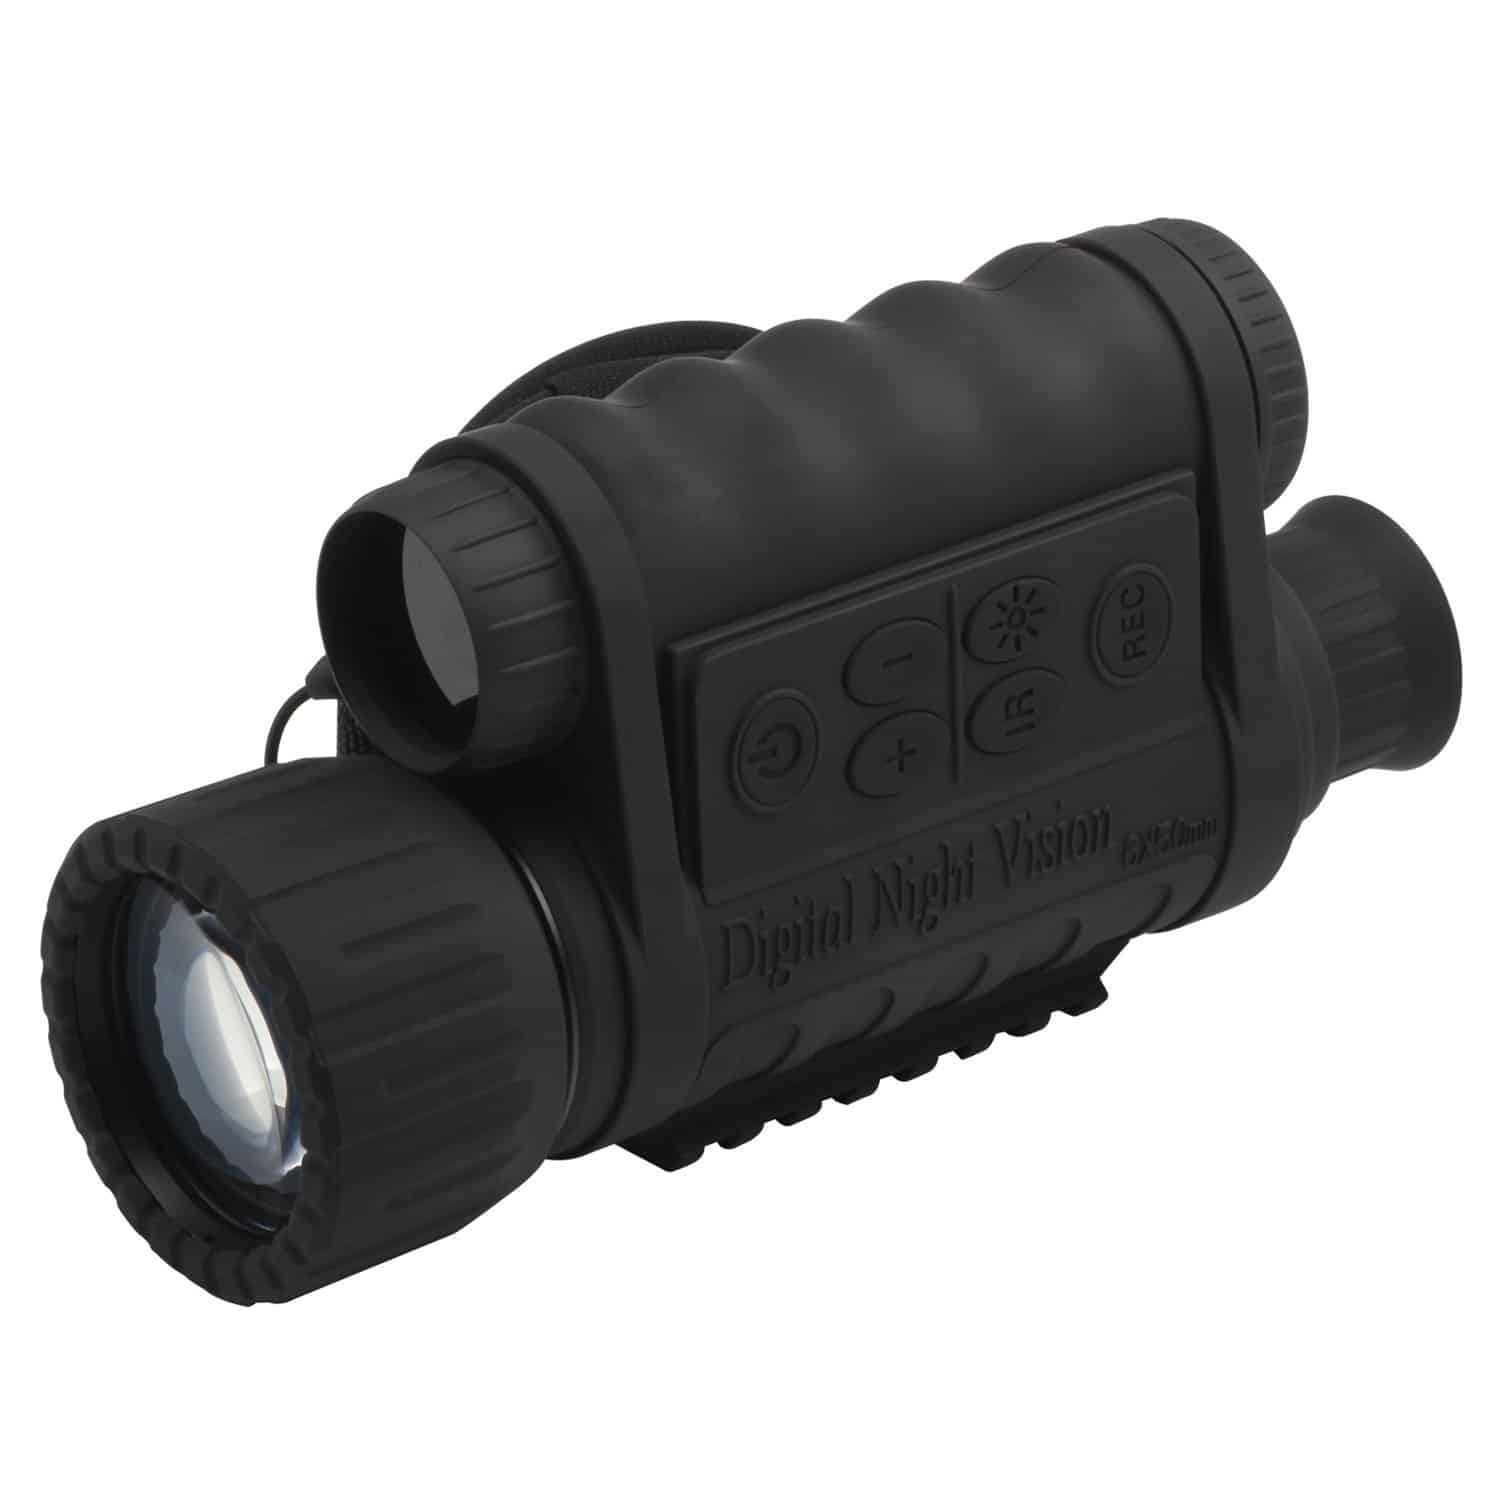 Top 10 Best Night Vision Monoculars in 2022 TopTenTheBest